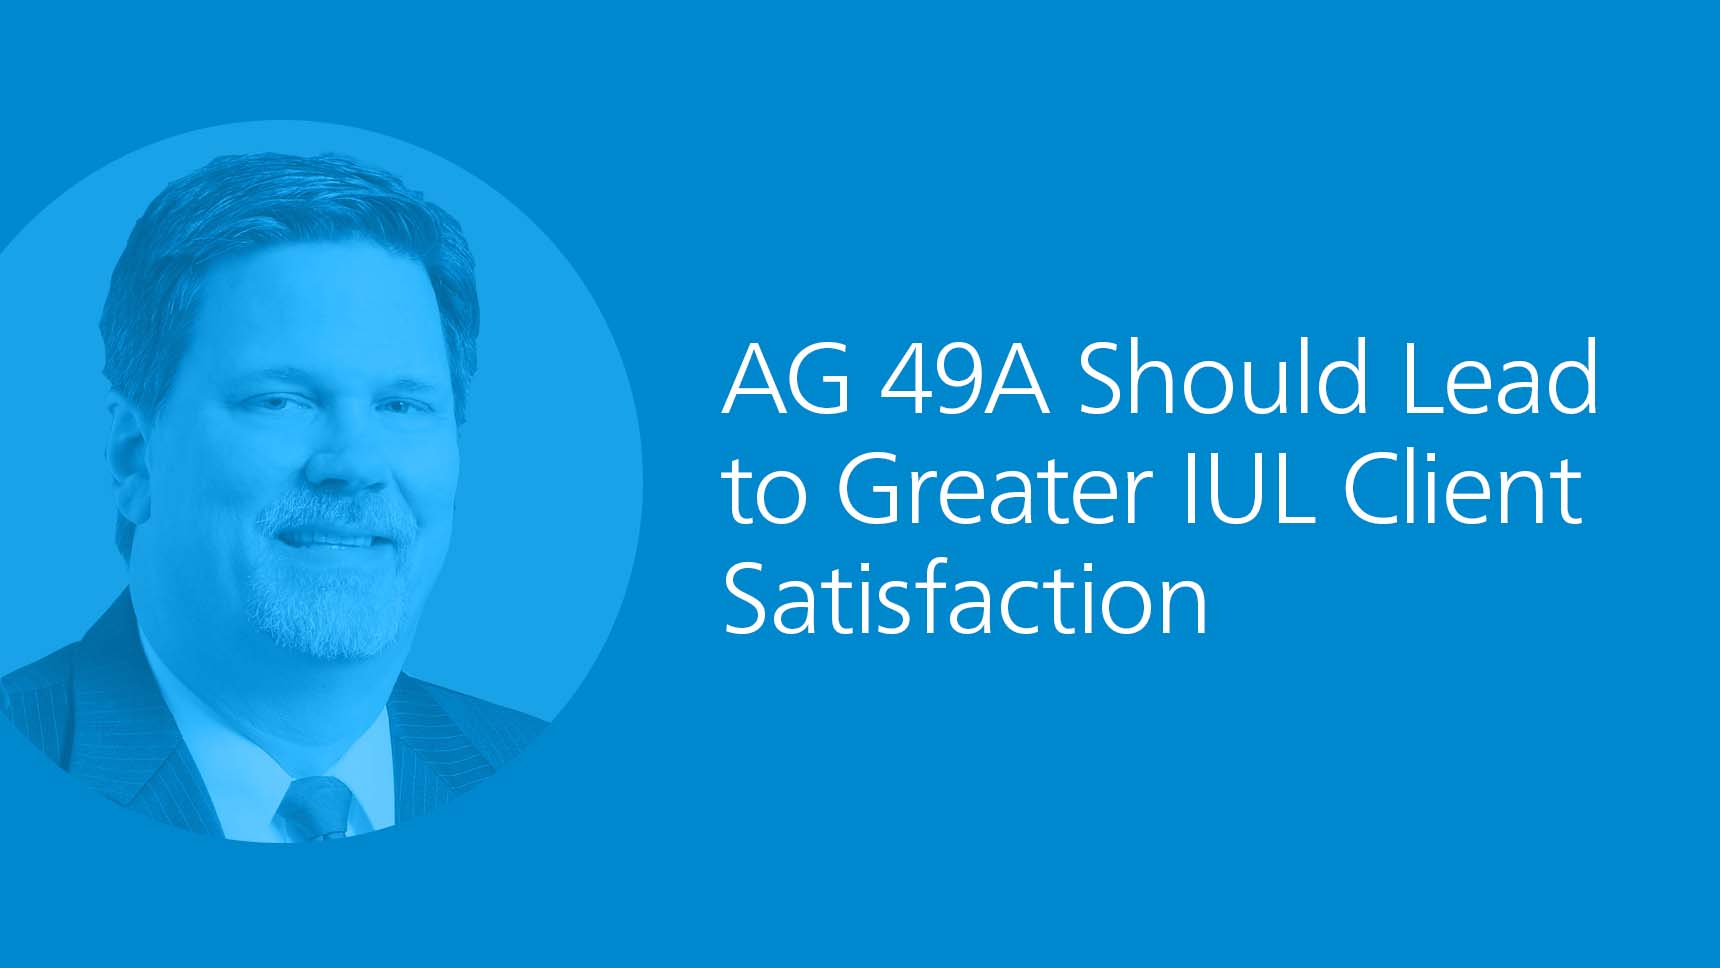 AG 49A Should Lead to Greater IUL Client Satisfaction